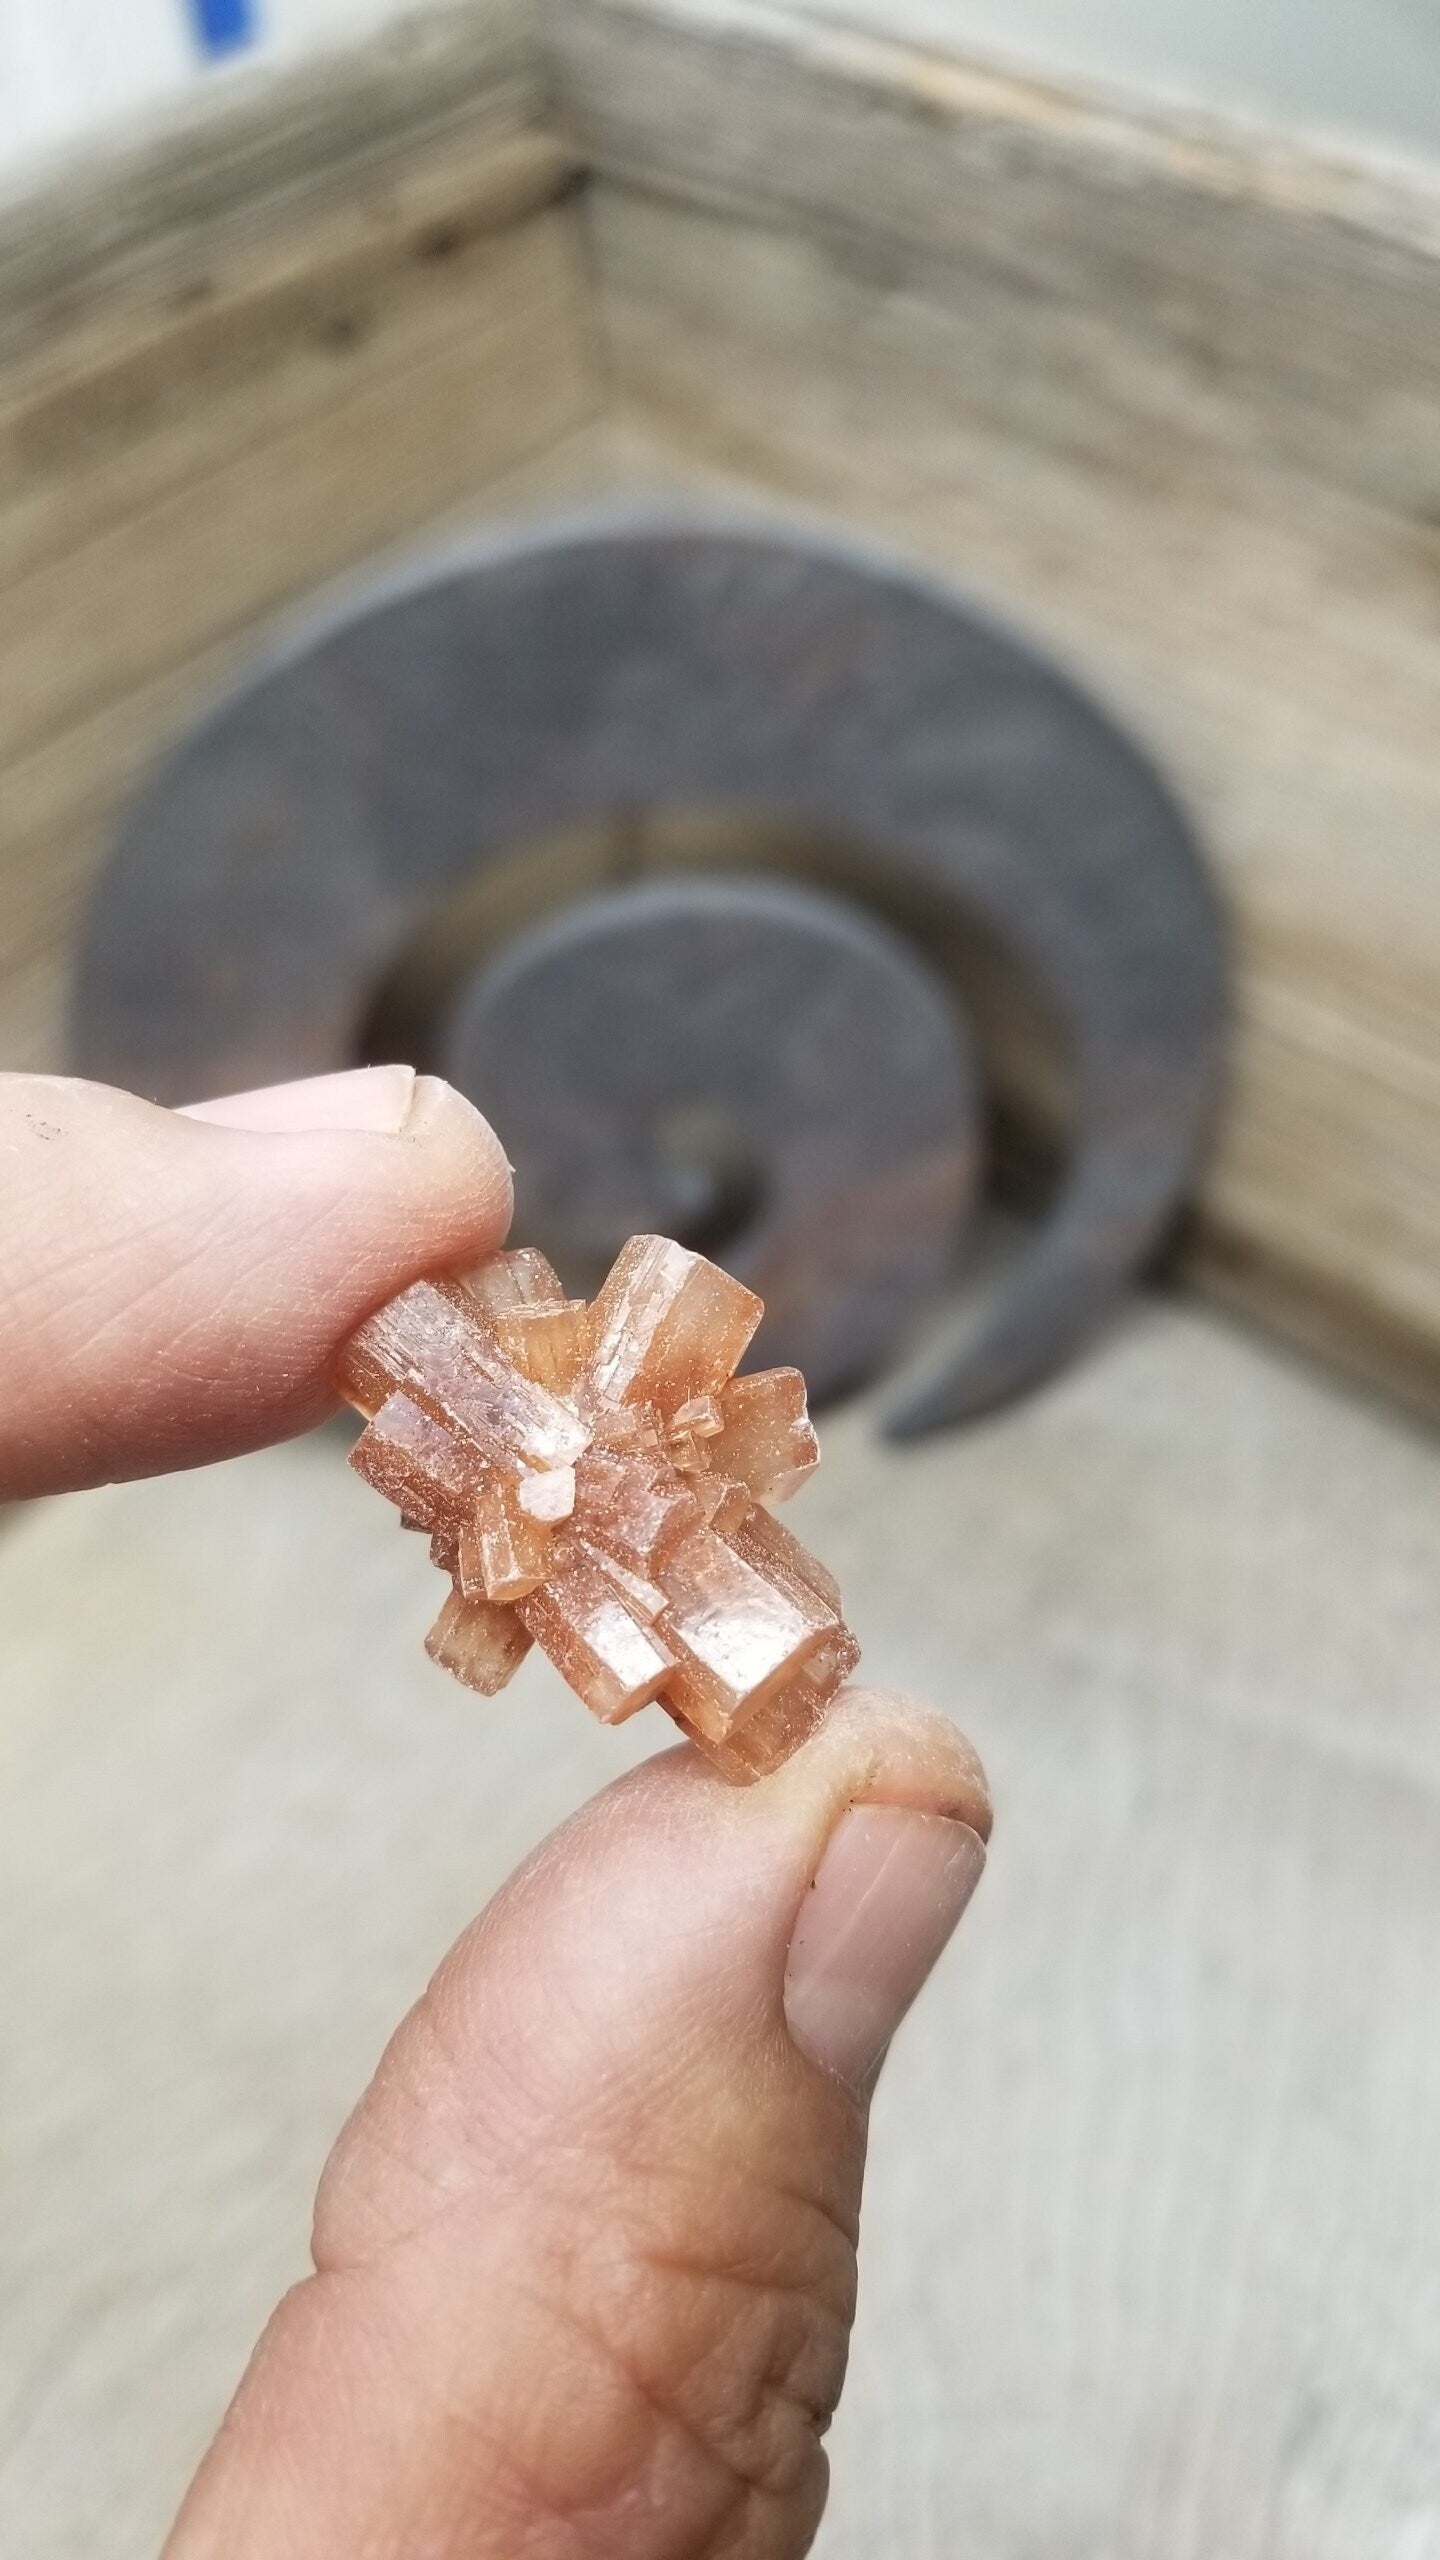 Aragonite Small Crystal Cluster Explosion. Grounding Focused Attention 1314 (Approx. 3/4" - 1 1/4")